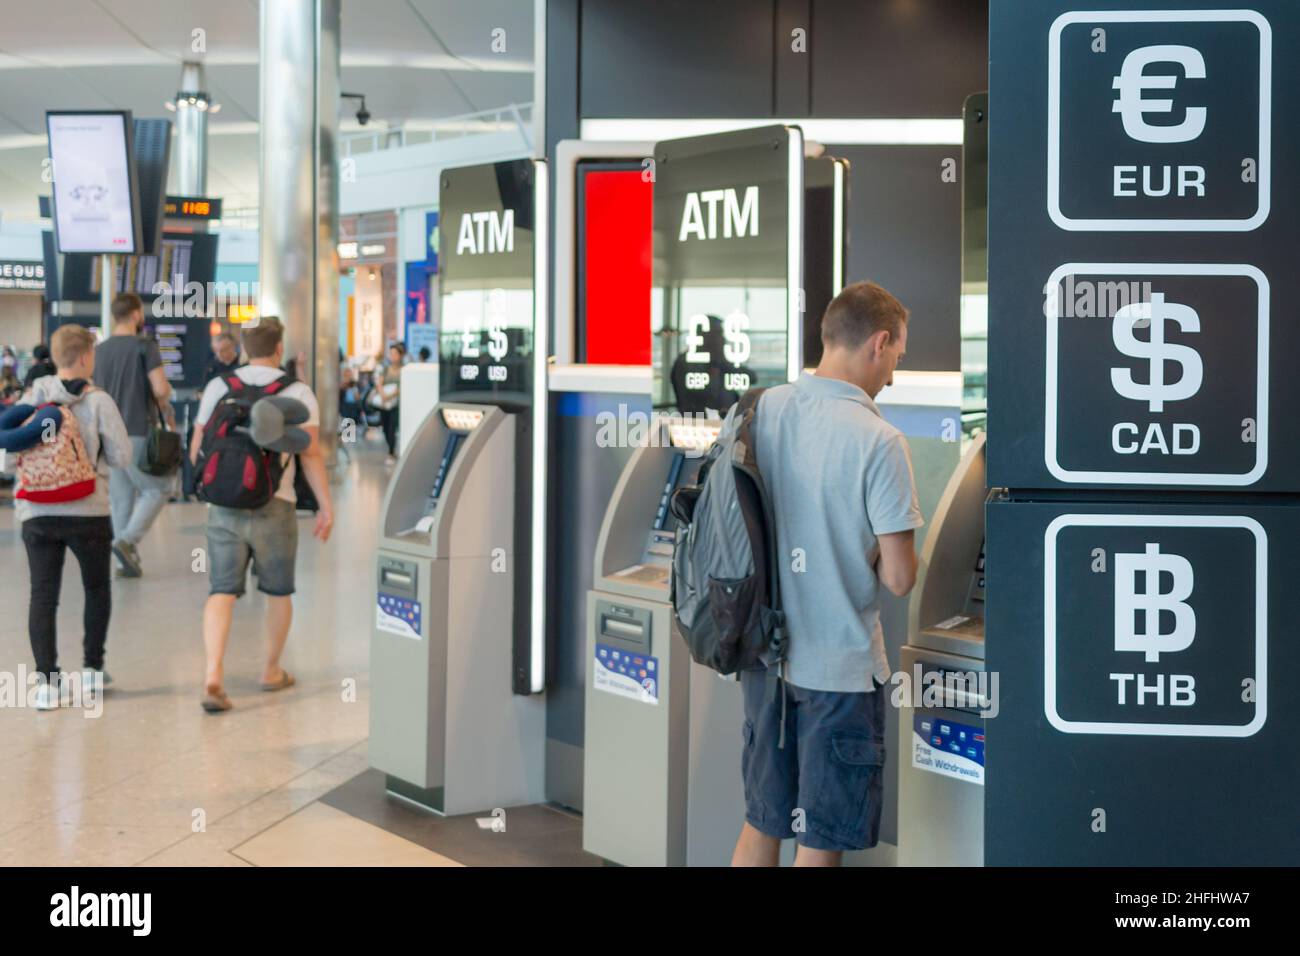 Airport ATM offering multiple currencies Stock Photo